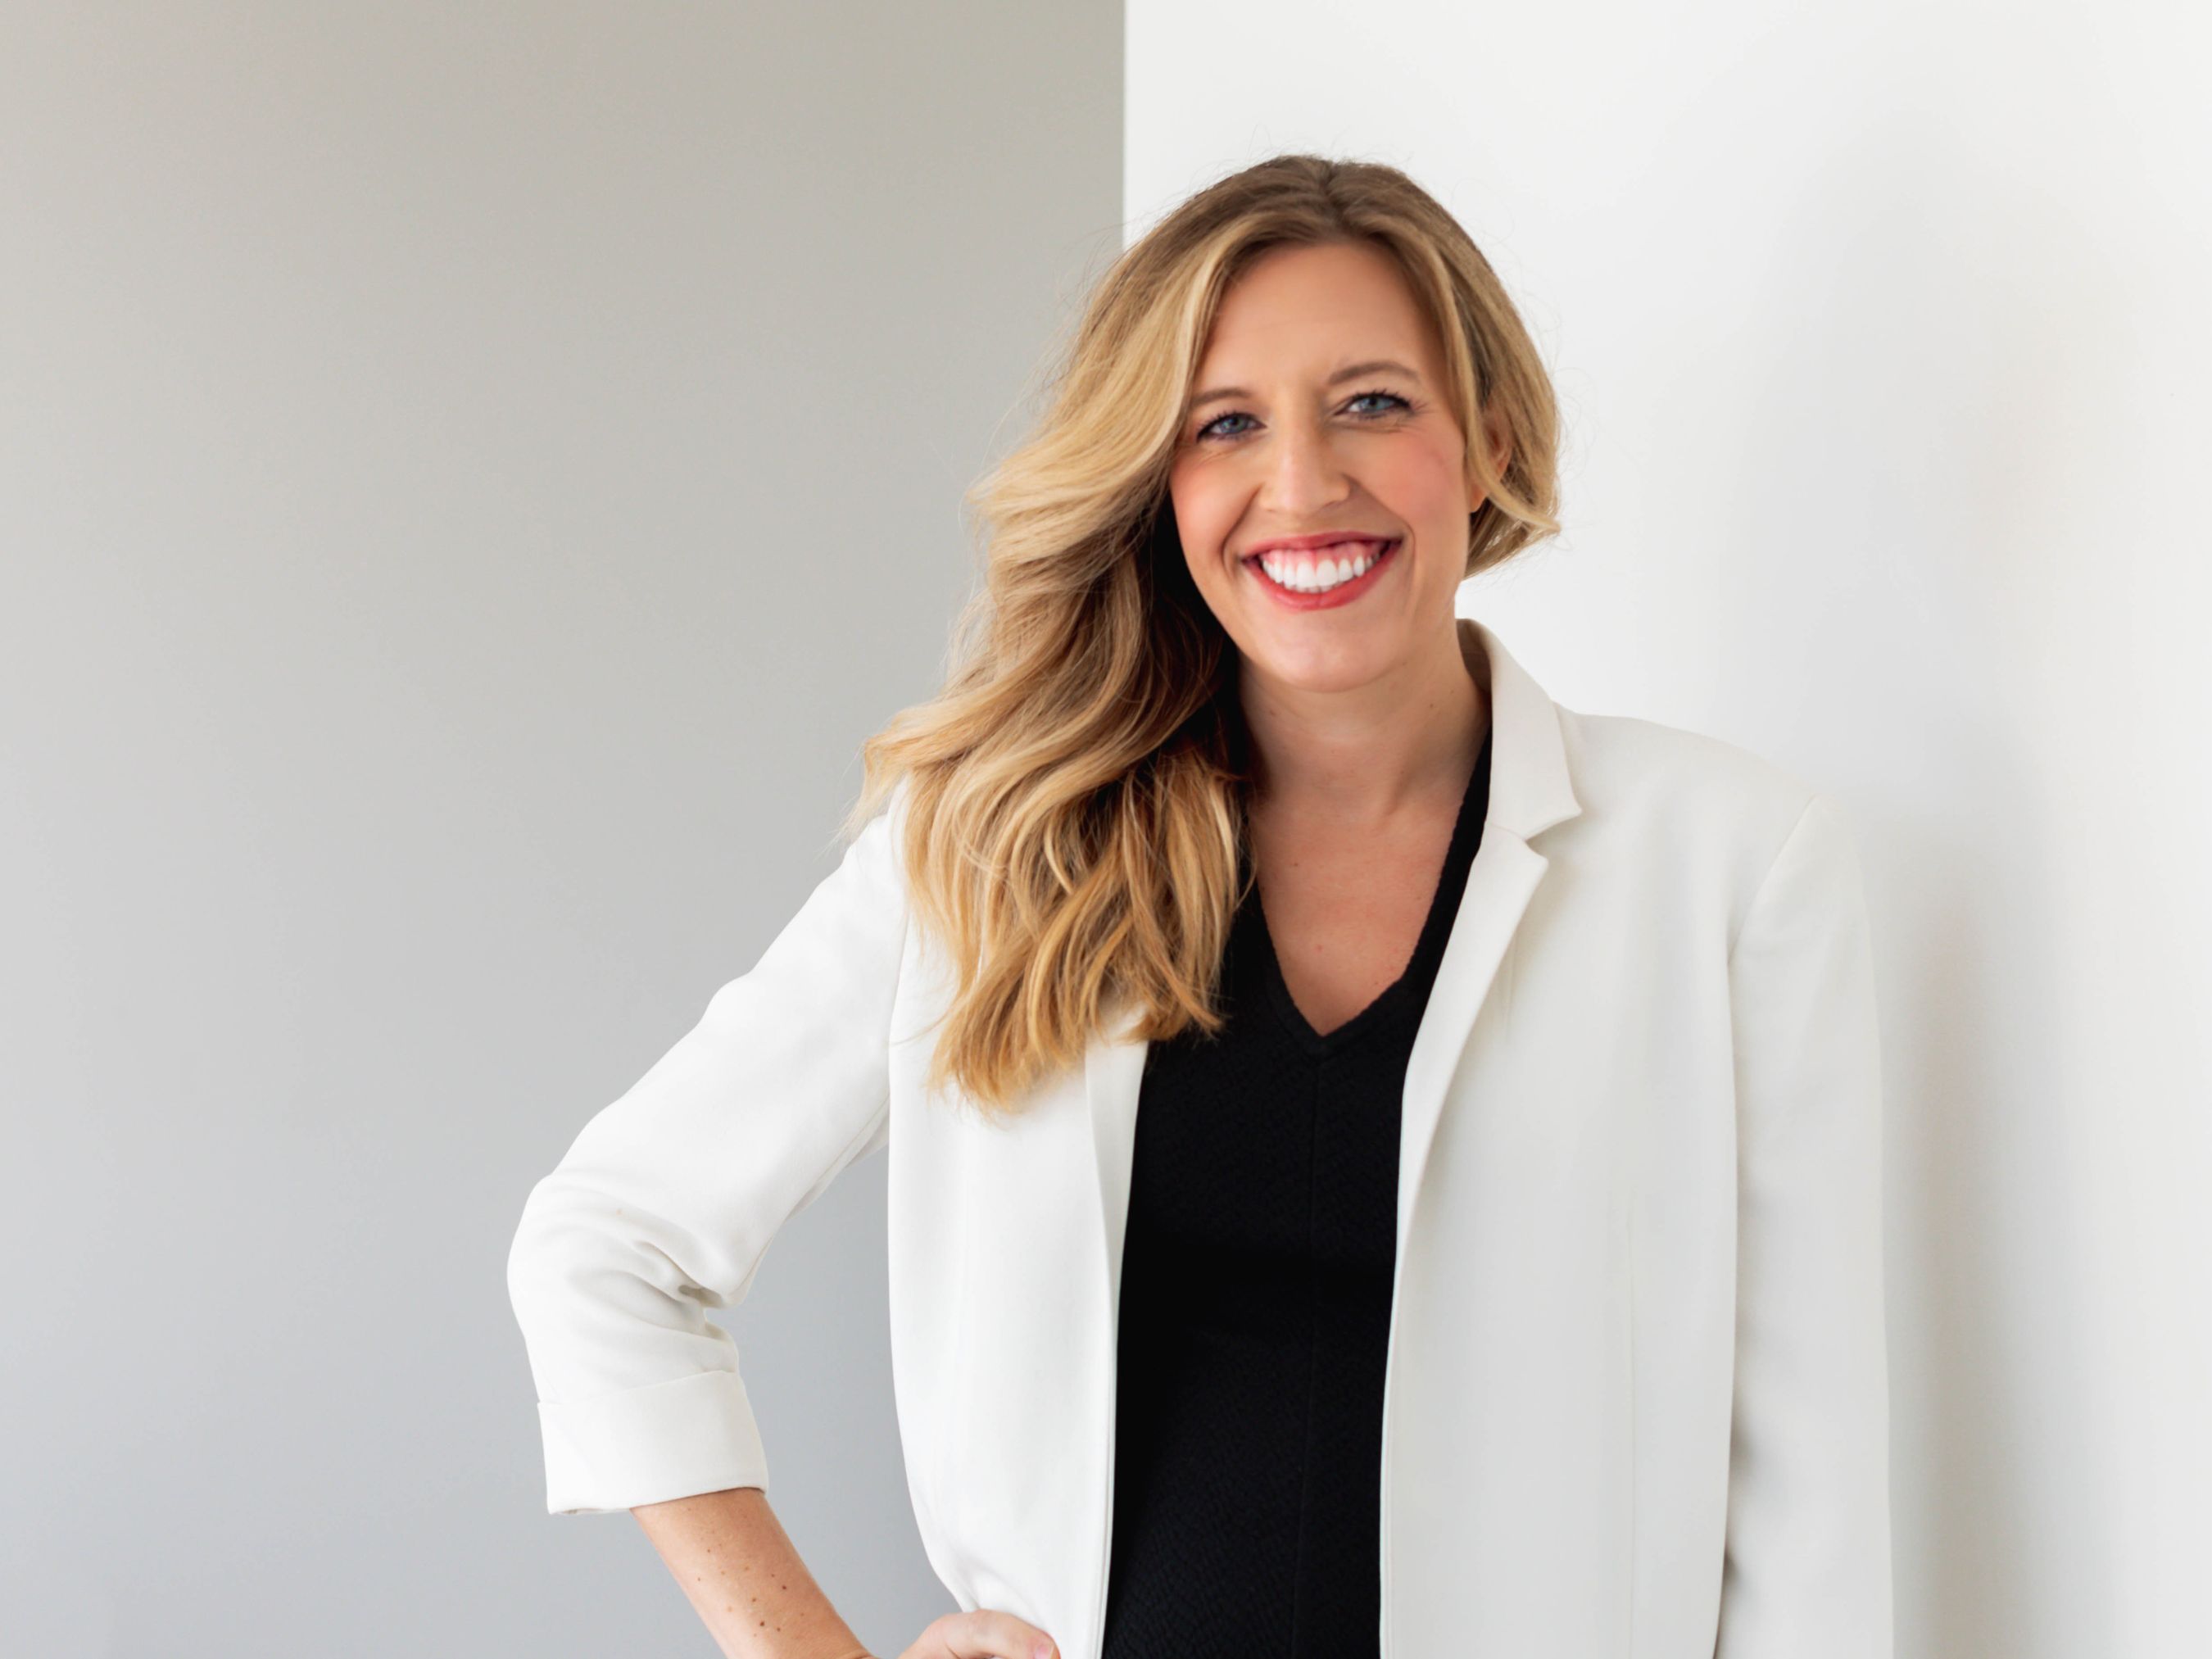 Mekell Barker Promoted to VP of Account Service, Hotels at Tambourine